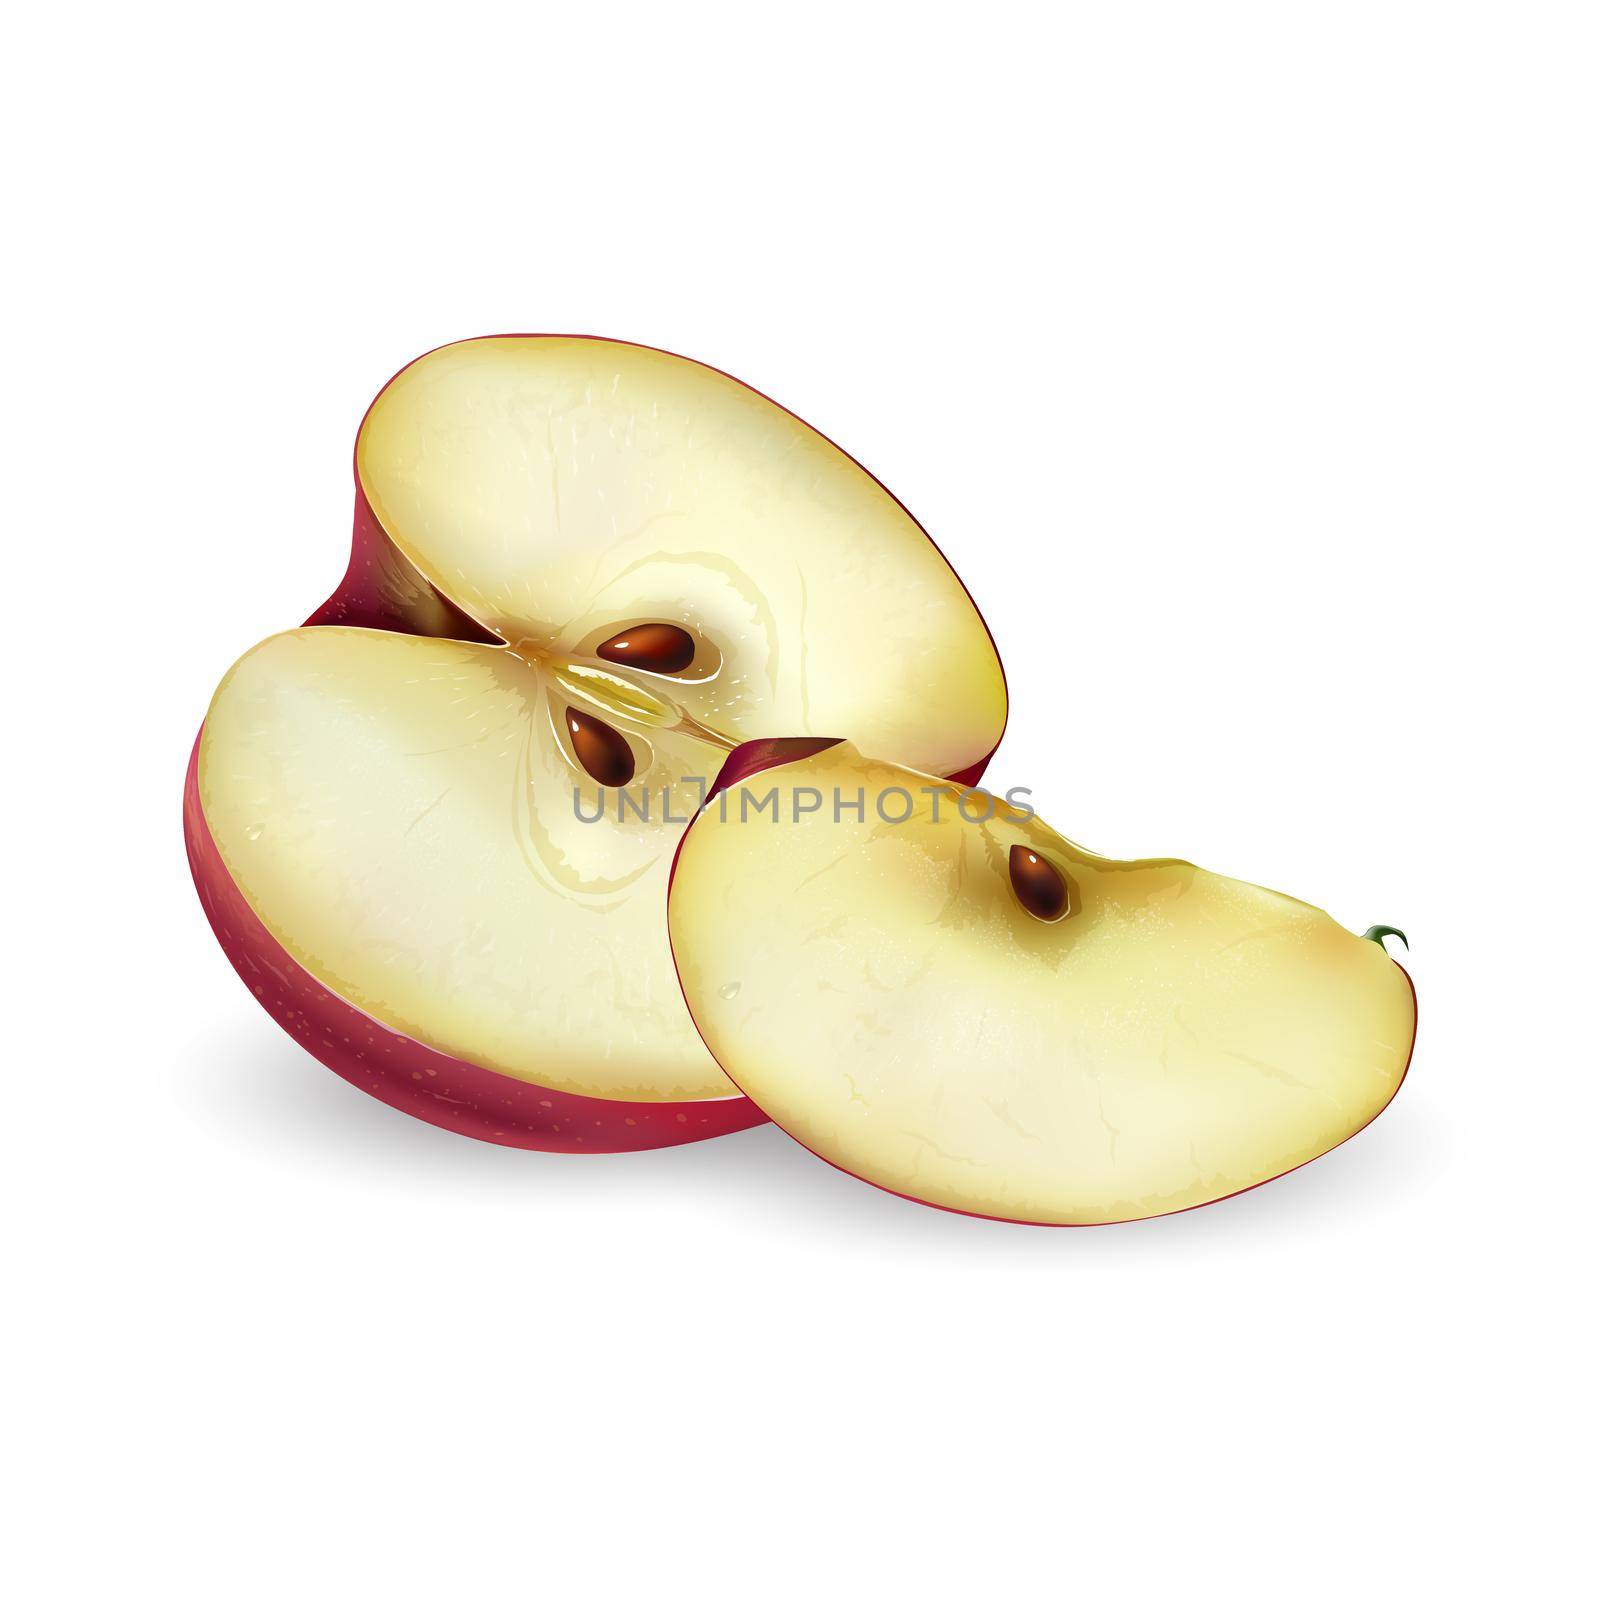 Sliced red apple on a white background. by ConceptCafe